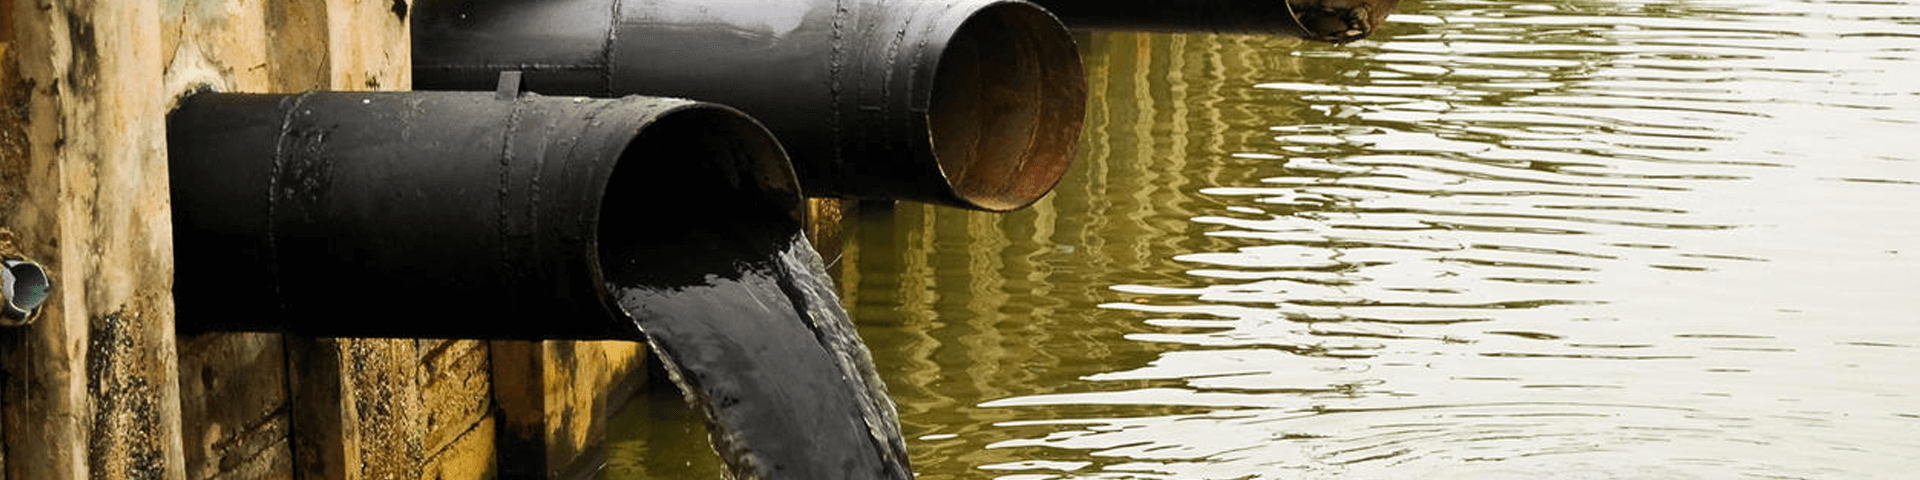 Sewage taints rivers, canals